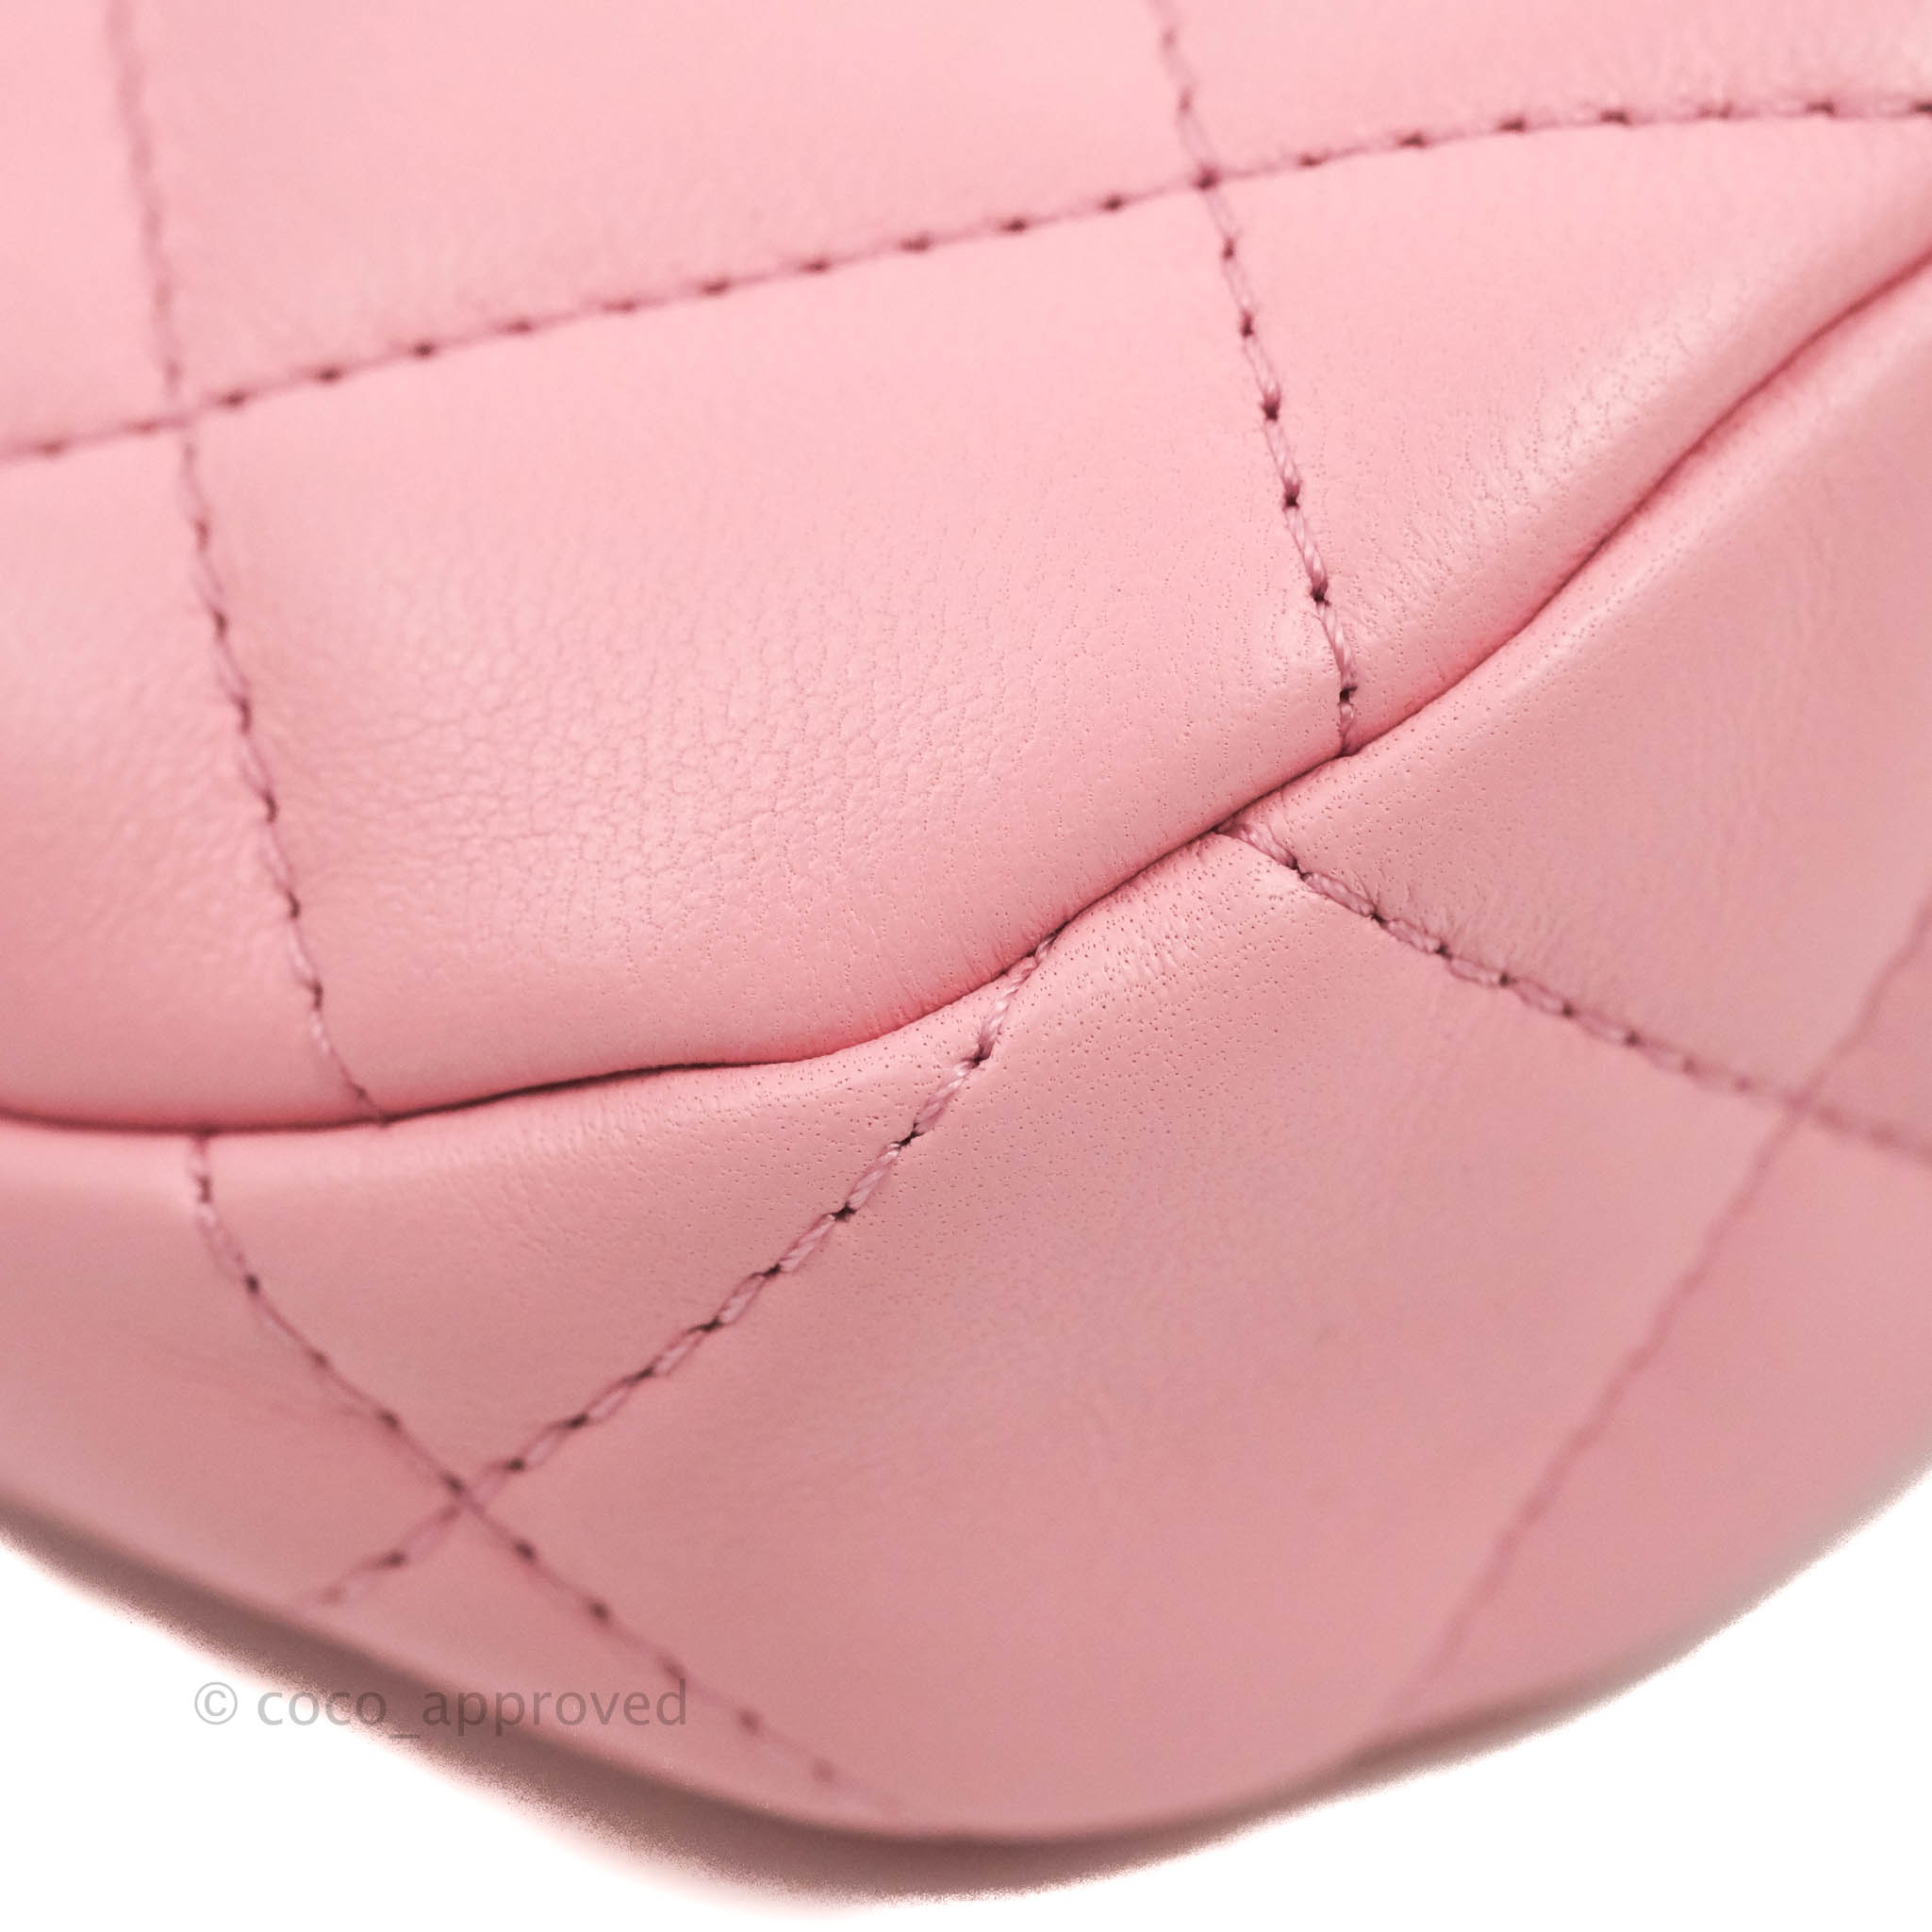 CHANEL Lambskin Quilted Mini Chain Around Hobo Pink 1258080